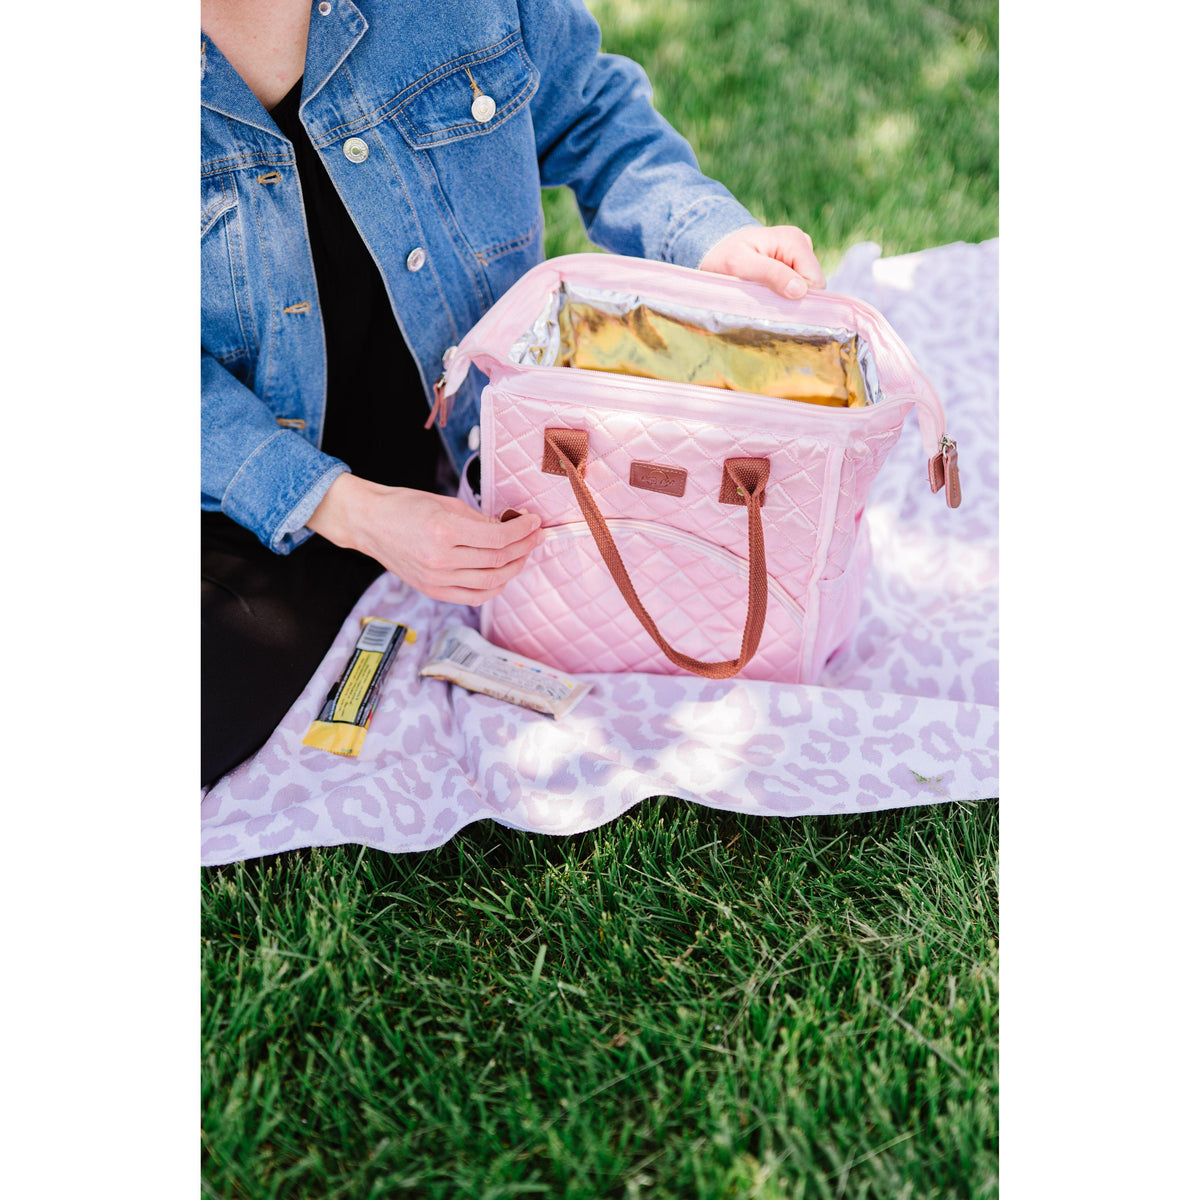 Women's Cooler Lunch Bag | The Classy Cloth - becauseofadi